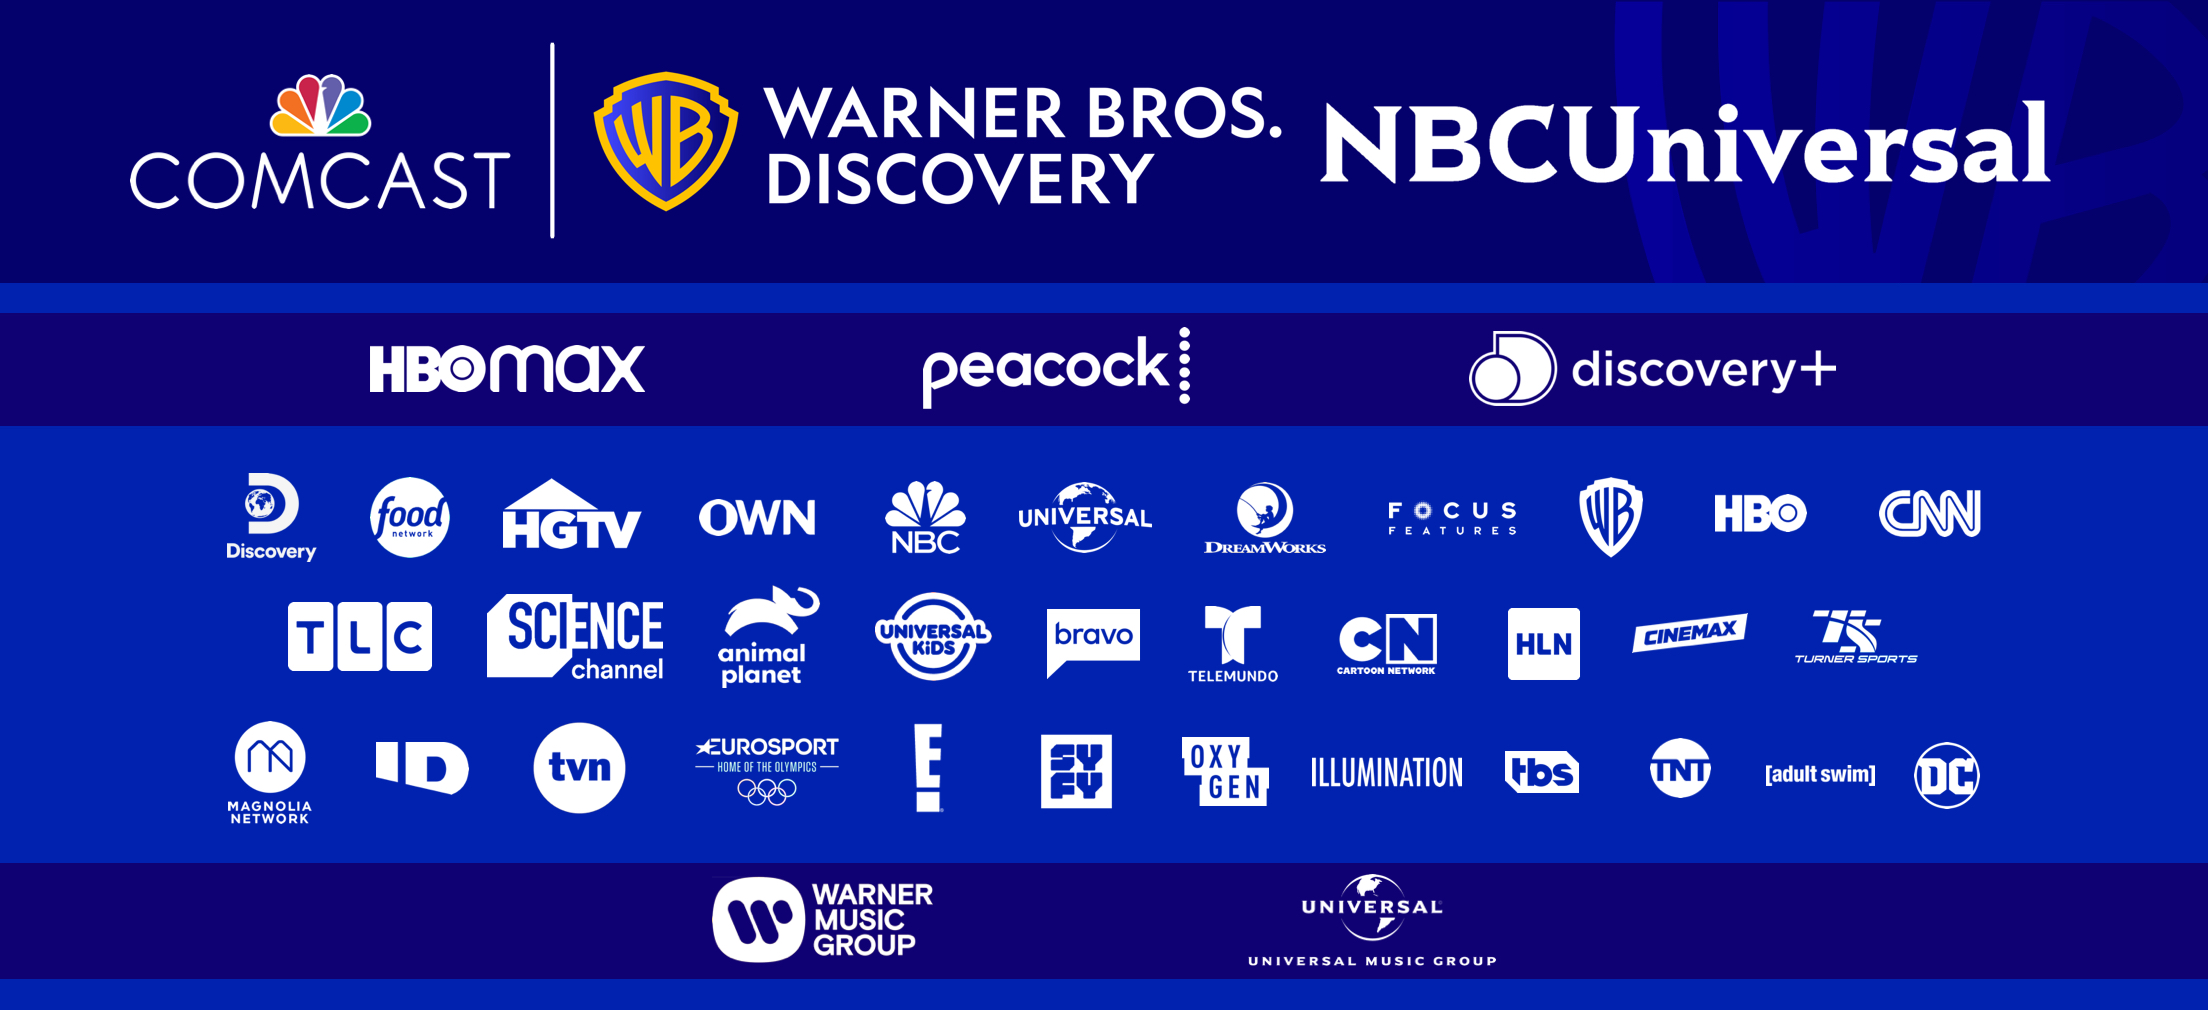 Warner Bros. Discovery and NBCUniversal merger by VictorPinas on DeviantArt